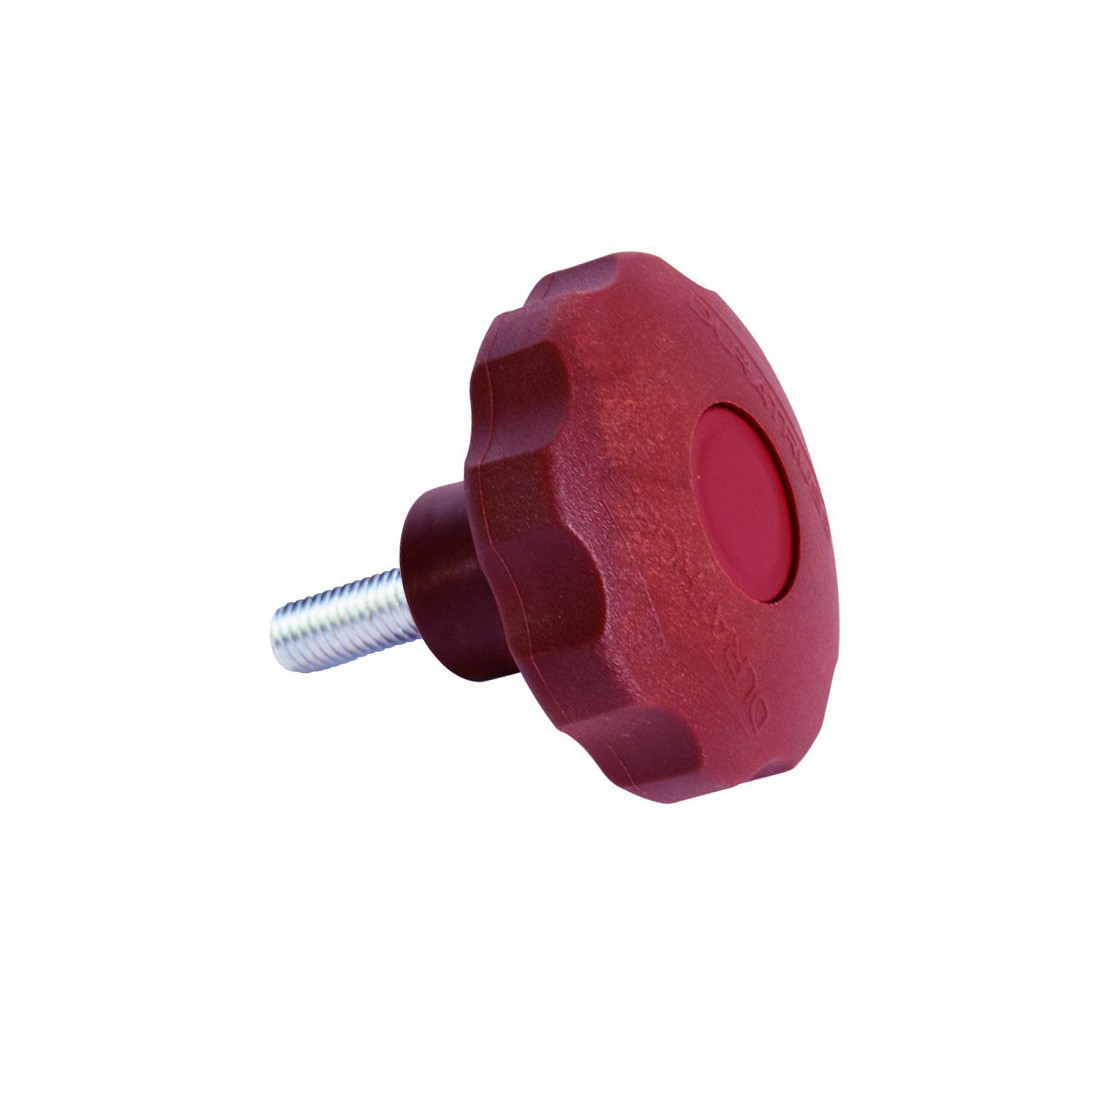 DURASTAGE Red Knob For Handrail Clamp